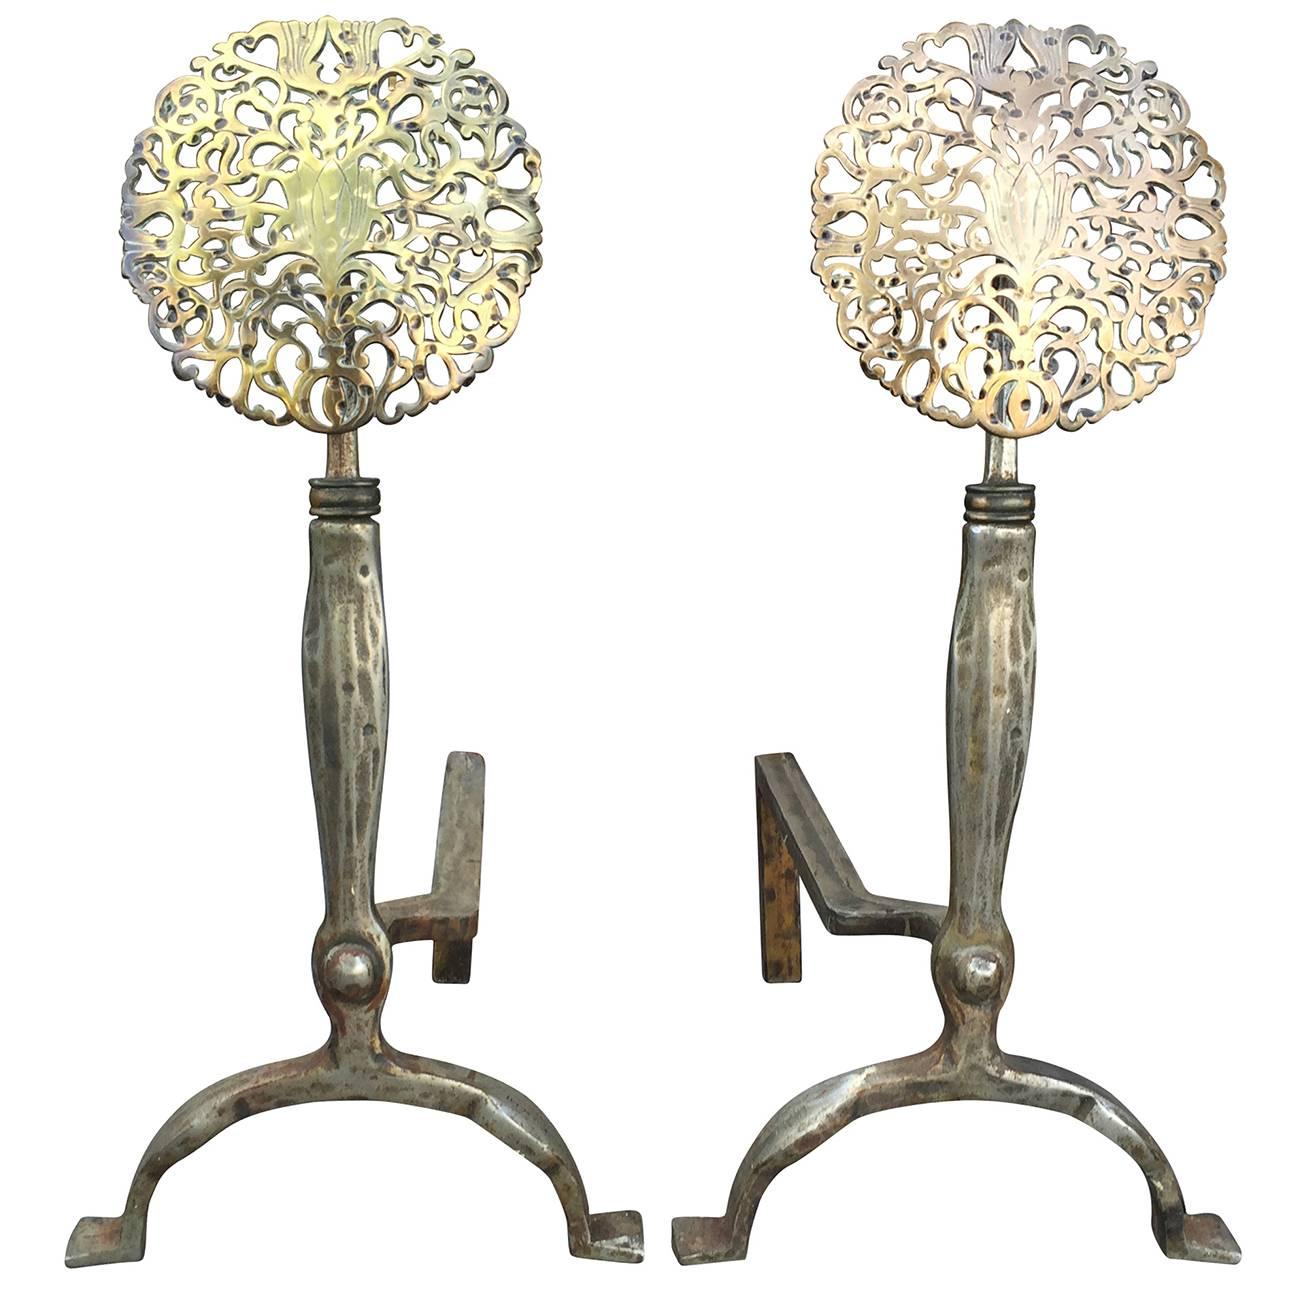 Pair of 19th-20th Century Steel and Brass Medallion Andirons